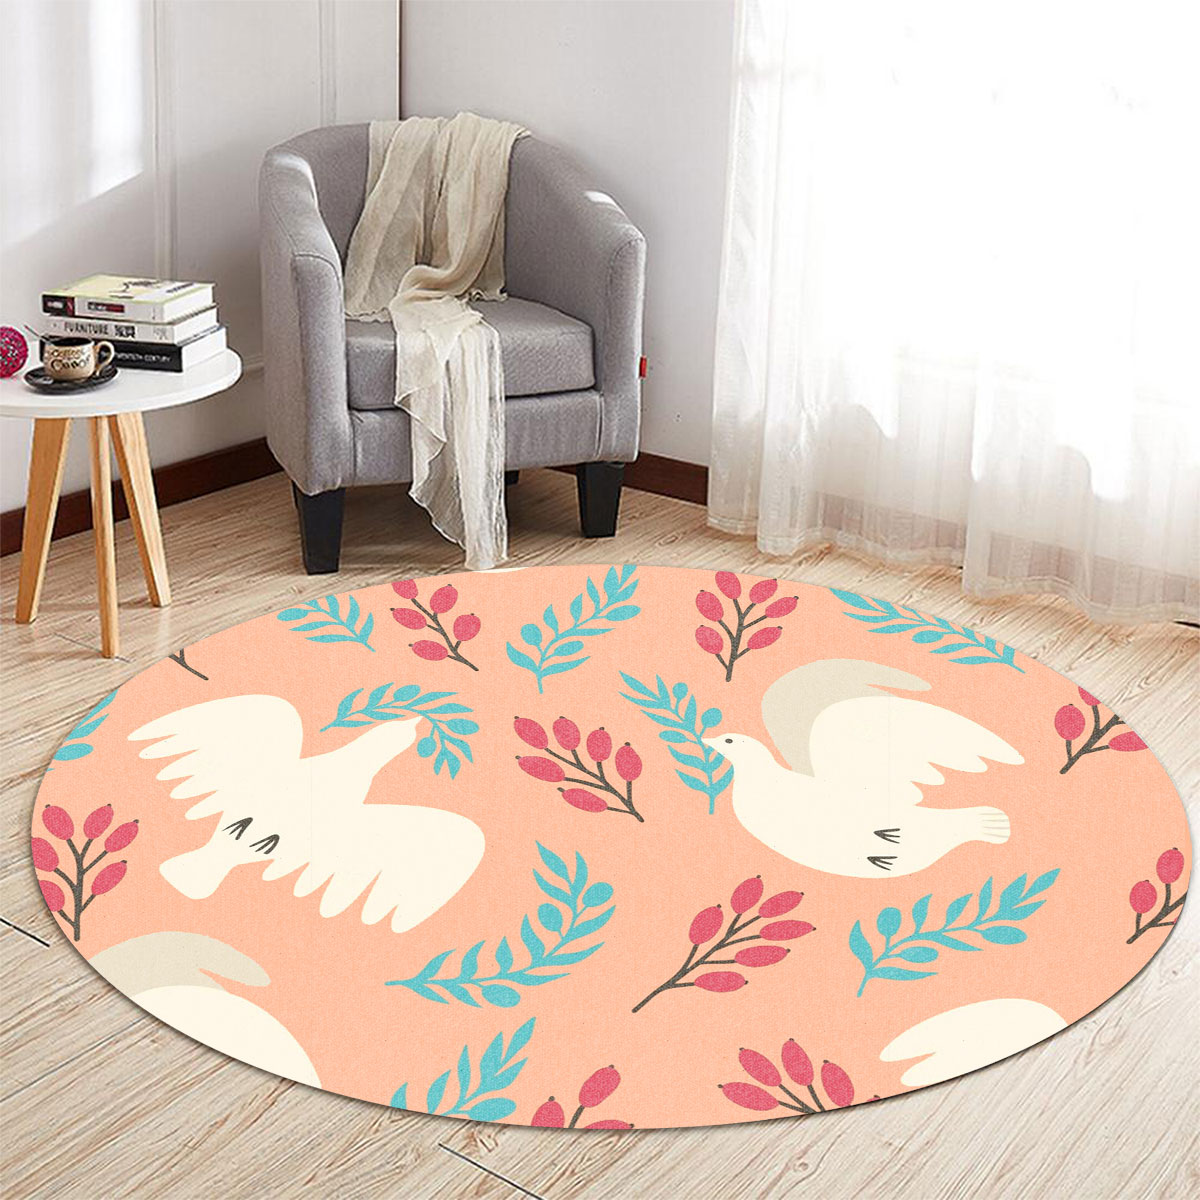 White Dove With Olive Branch Round Carpet 6